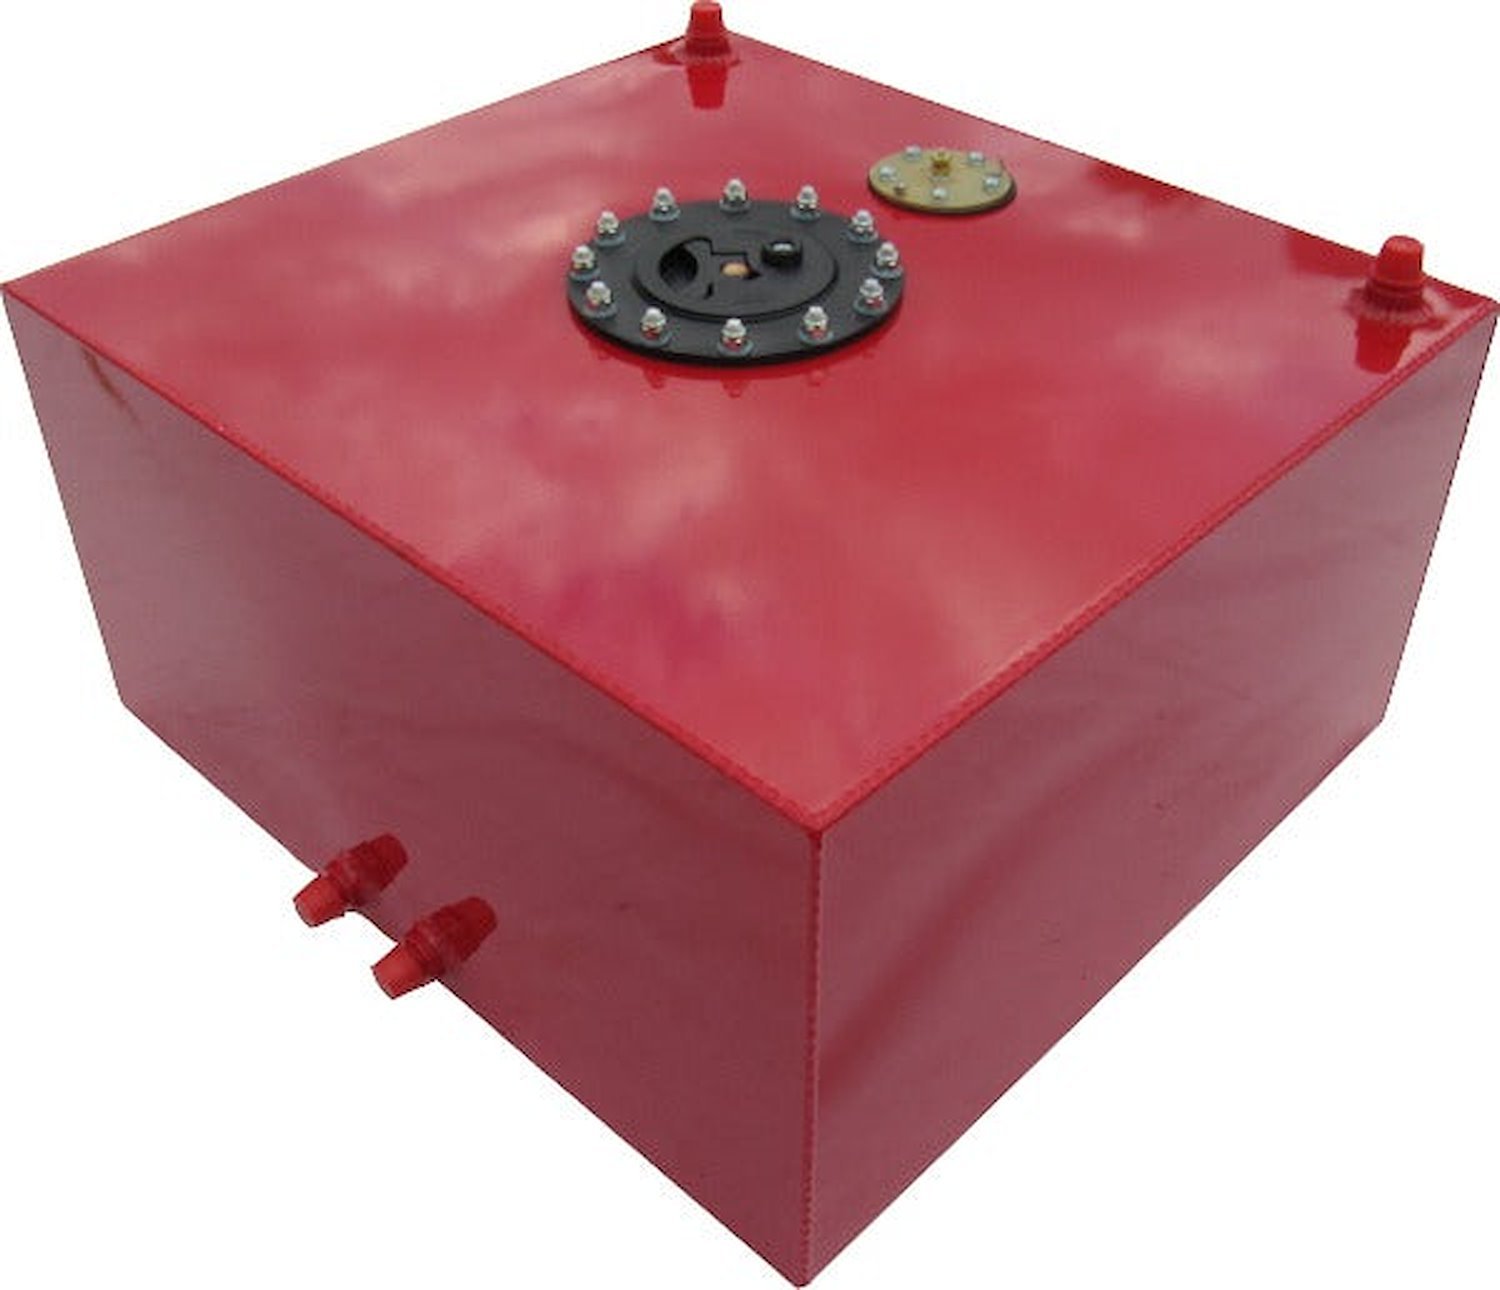 2150ABS Aluminum Fuel Cell, 15-Gallon, Red Powder Coated